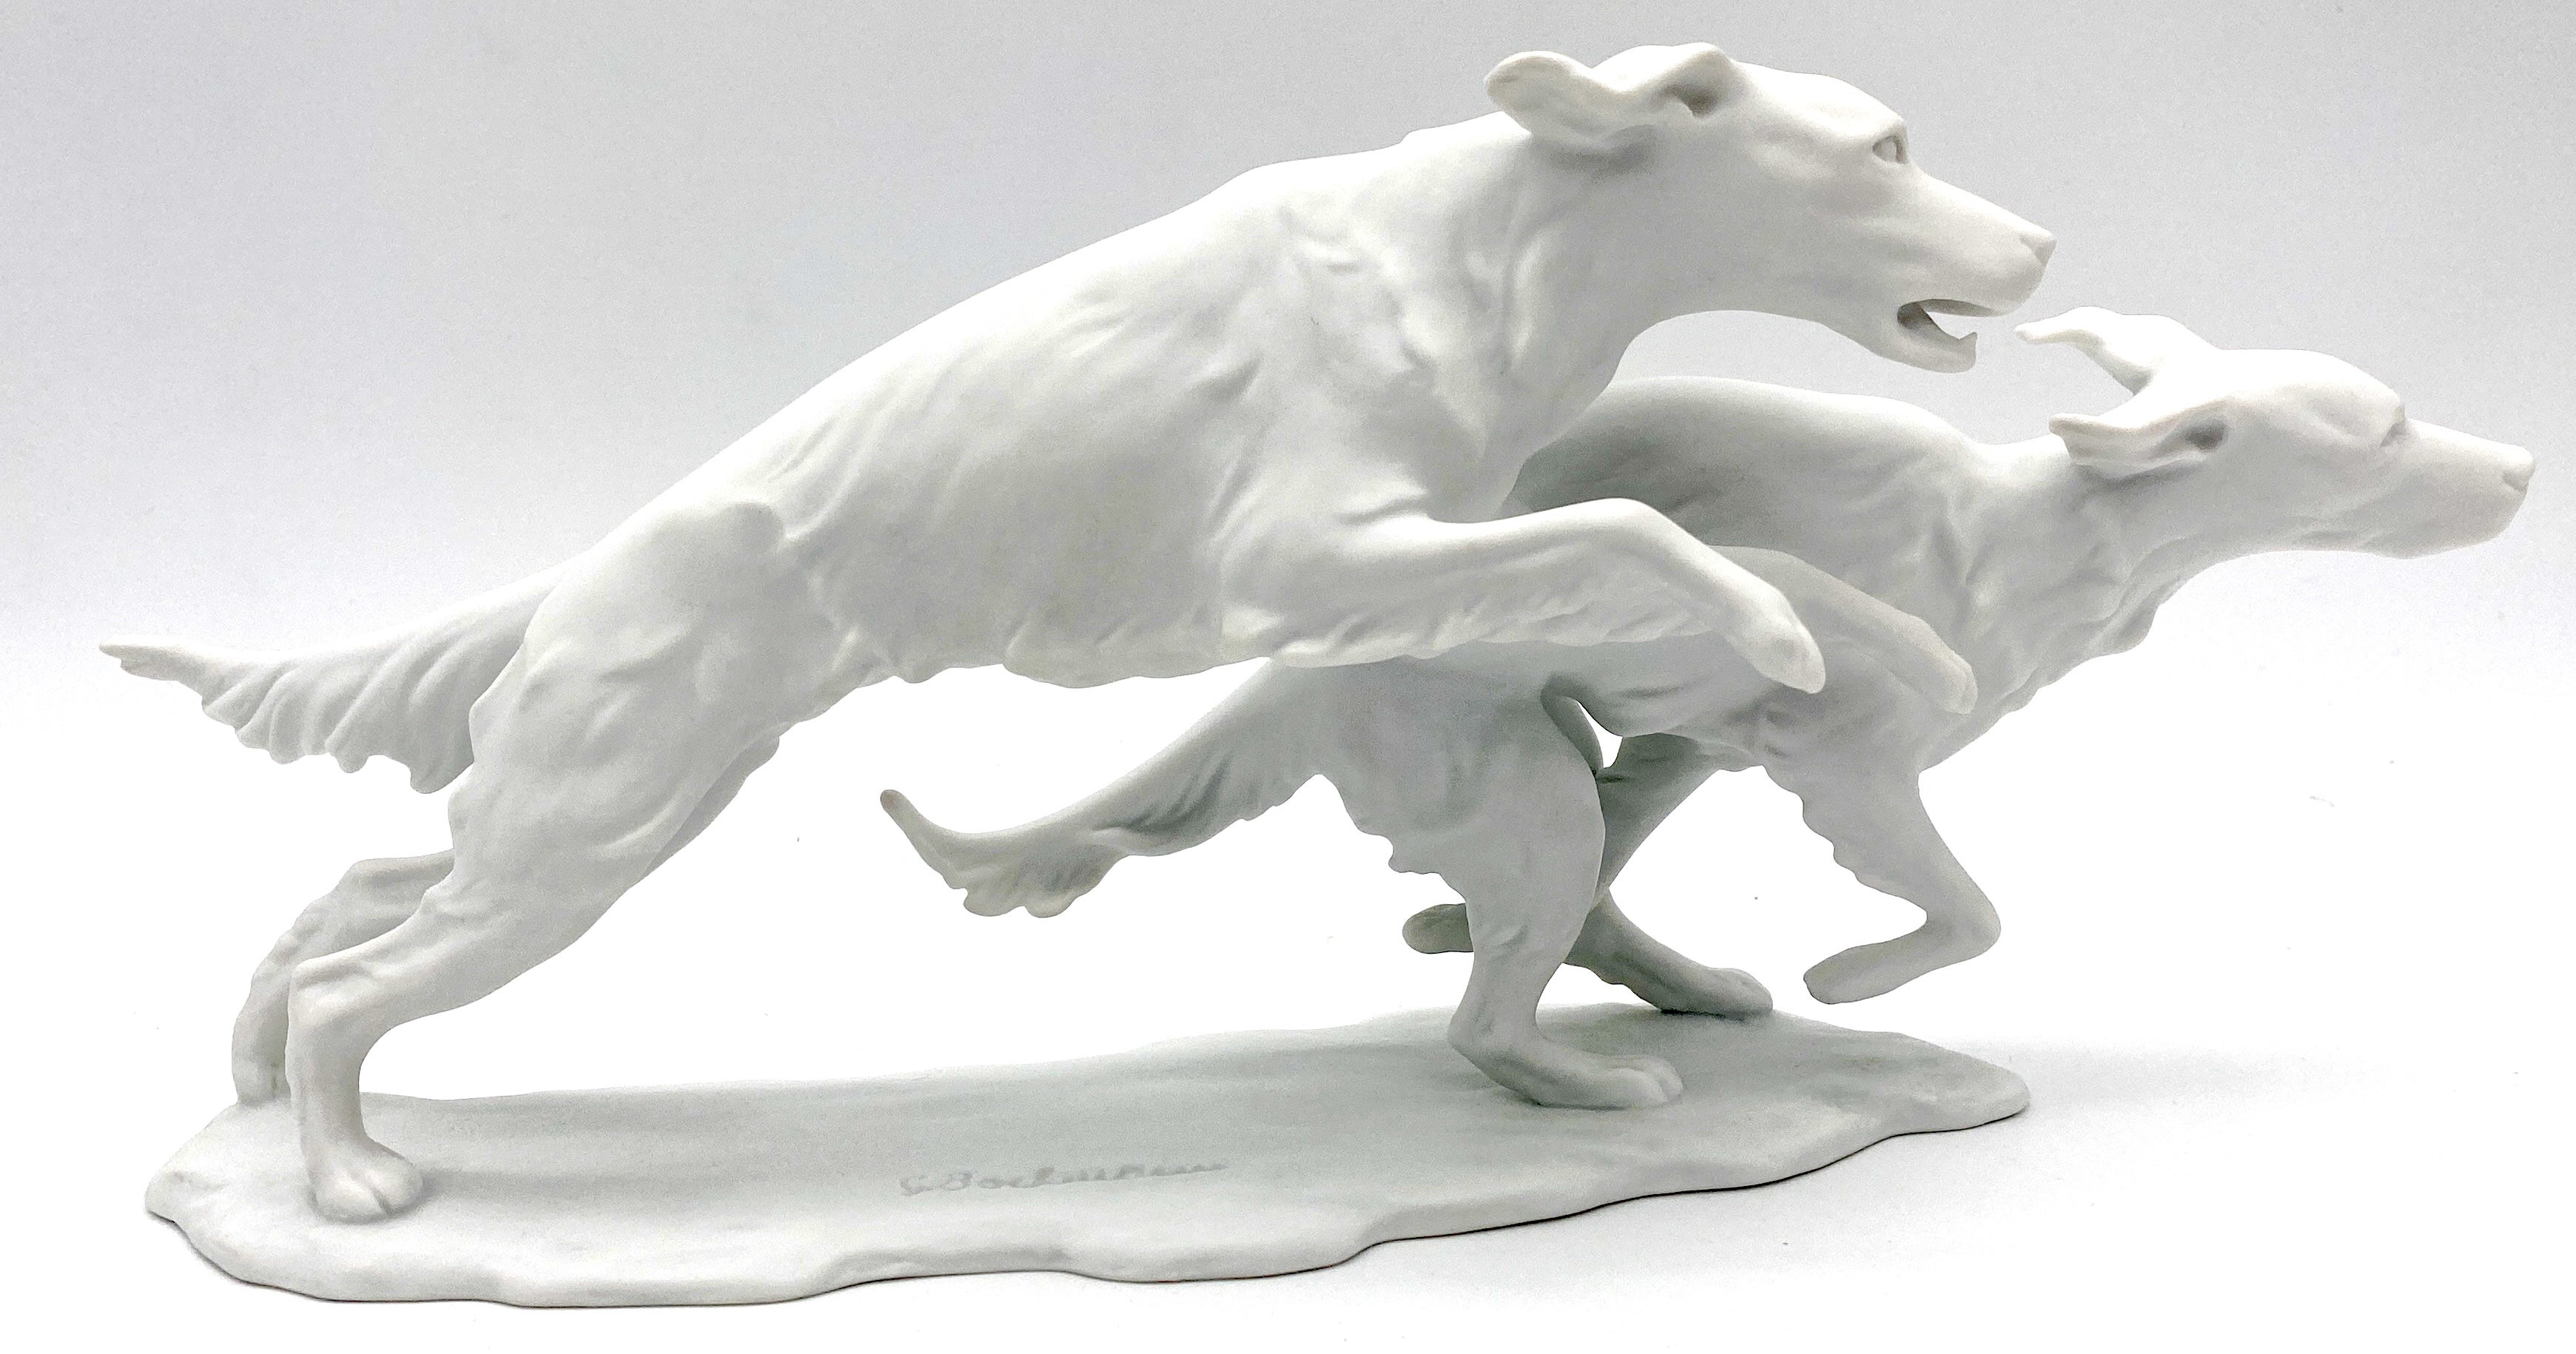 Kaiser Bisque Porcelain 'Running Dogs' by G. Bochuraun (b. 1925) 
Impressed signature of G. Bochuraun on the base

 A Magnificent Kaiser Bisque Porcelain sculpture titled 'Running Dogs' by G. Bochuraun (b. 1925). The finely modeled grouping features